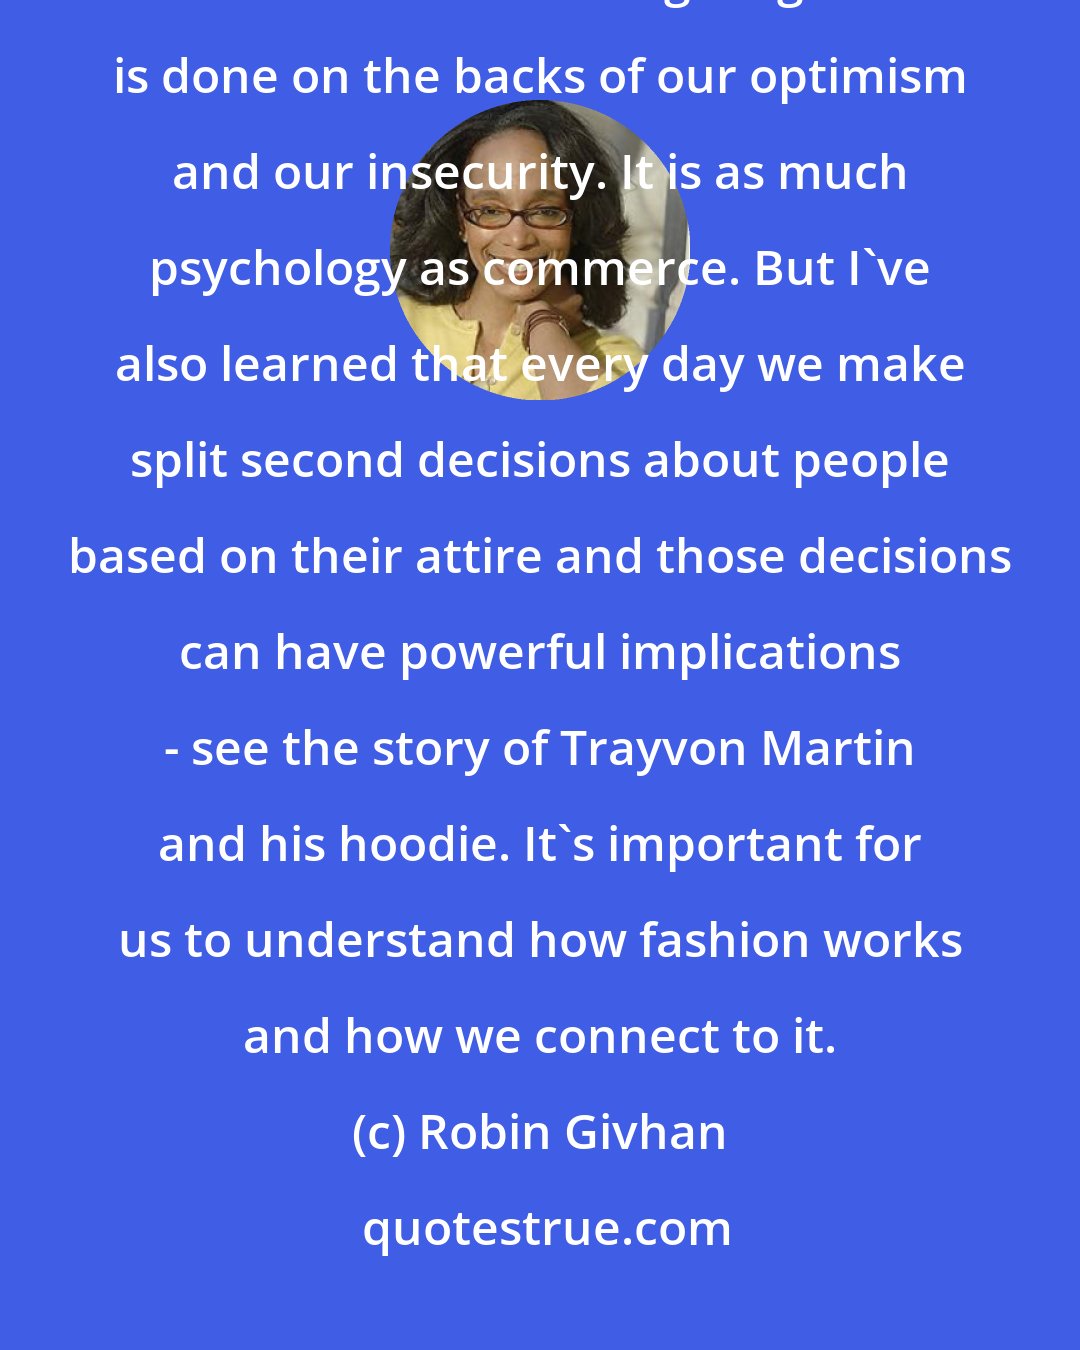 Robin Givhan: Over the course of the years, I've learned [that] fashion is a fascinating business about selling magic. It is done on the backs of our optimism and our insecurity. It is as much psychology as commerce. But I've also learned that every day we make split second decisions about people based on their attire and those decisions can have powerful implications - see the story of Trayvon Martin and his hoodie. It's important for us to understand how fashion works and how we connect to it.